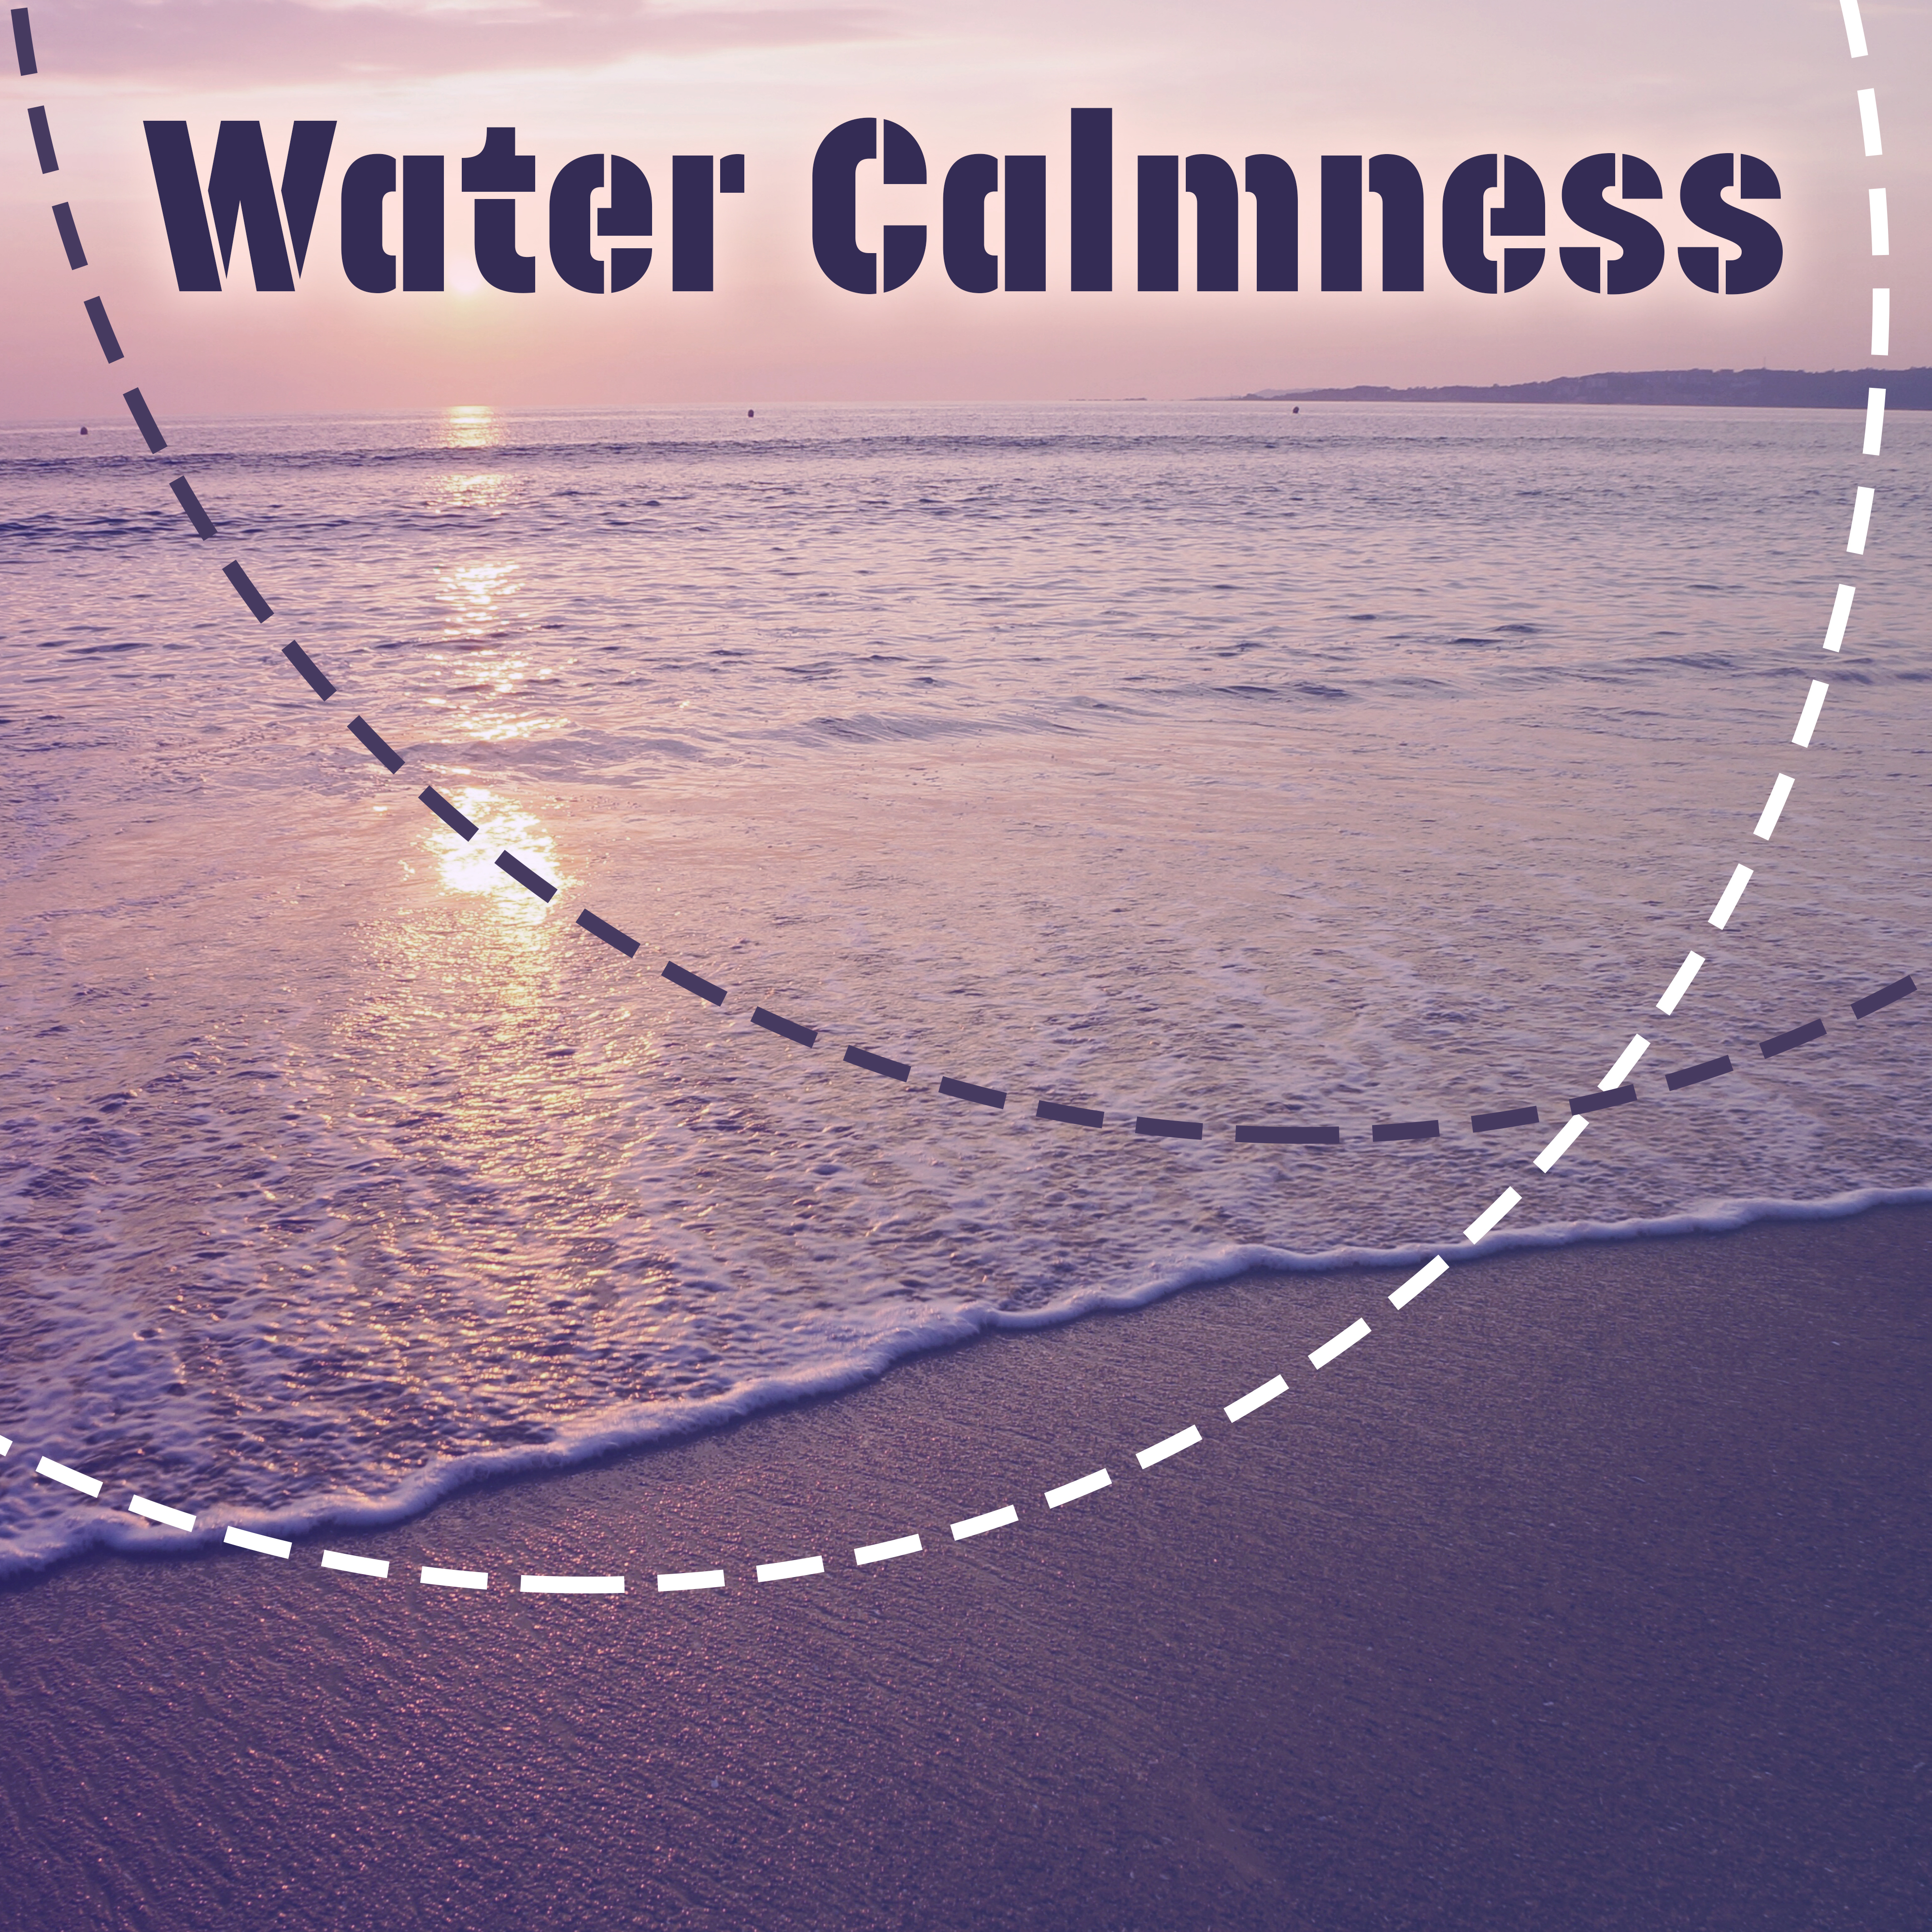 Water Calmness – Soft Nature Sounds, Inner Silence, Body & Mind Harmony, Stress Relief, New Age Relaxation